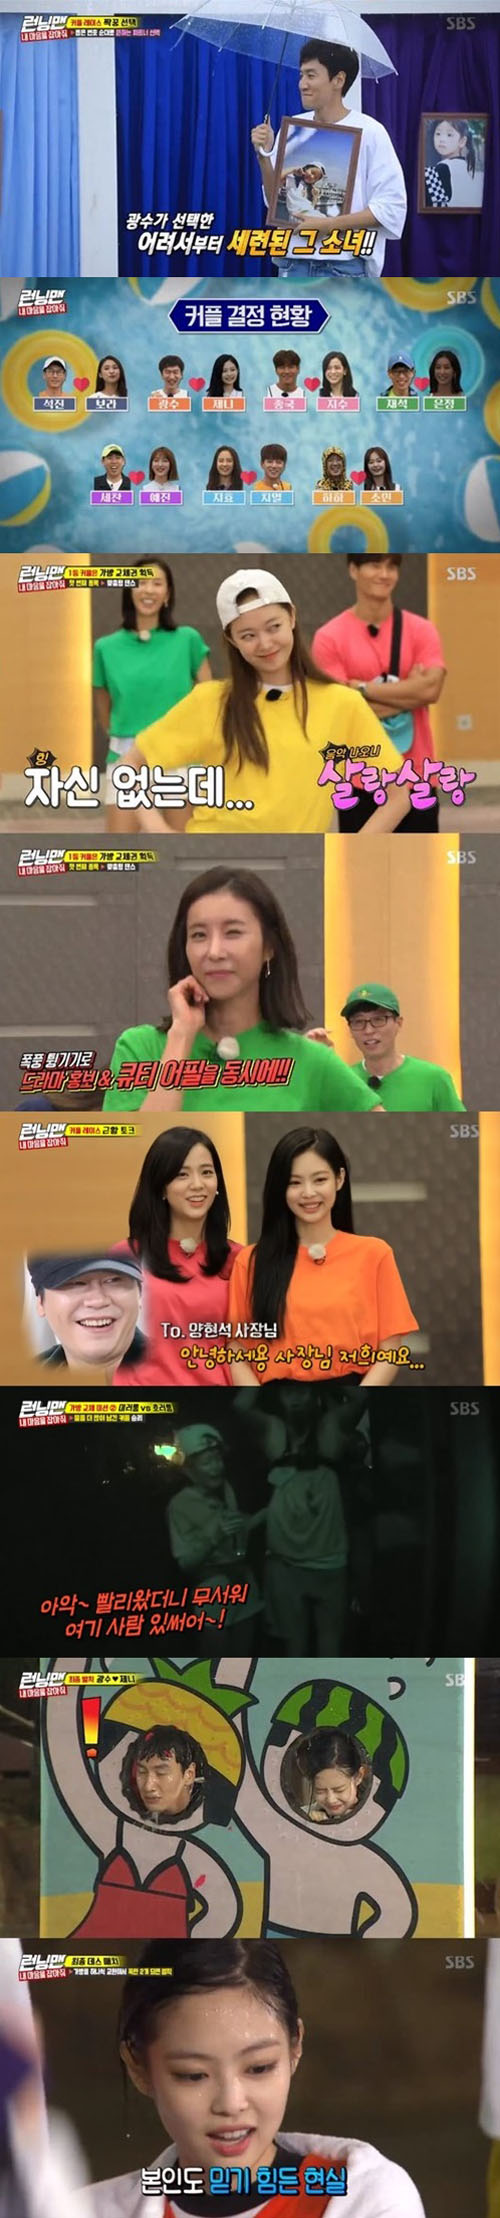 SBS Running Man swept the real-time search rankings and ranked first in the same time zone of 2049 ratings for 6 consecutive weeks.According to Nielsen Korea, a ratings agency on the 16th, Running Man, which was broadcast on the 15th, recorded 4.1% of target audience ratings (based on households in the Seoul metropolitan area) between 20 and 49 years old (hereinafter referred to as 2049), which is an important indicator of major advertising officials, beating Happy Sunday (3.3%) and Masked Wang (2.9%) which were broadcast on the same time zone.The show was decorated with a couple Race Get My Heart at Blackwater Park for the summer.Actor Han Eun-jung, Black Pink Jenny Kim and JiSoo, Ye Jin, Bora, and singer Hwang Chi-yeol appeared as guests and paired with the members and performed a pleasant race.In particular, Jenny Kim and JiSoo have been on the real-time search terms of major portal sites, among which Jenny Kim has attracted attention.Jenny Kim, who appeared shyly for the first time, started the first time with Lovely Three-Line Poem, and unlike the first appearance of self in the Blackwater Park Hoorroom experience, she laughed and laughed.In the end, Lee Kwang-soo, a partner, showed a great deal of guest-going.Jenny Kim also shone in the experience of the rides that followed.Fearing to ride, Jenny Kim said that the ride was more fun than she thought, and that she was hit once more to her partner Lee Kwang-soo, and she was completely different from the stage.In addition, Jenny Kim was also noted as a New Blow.Jenny Kim, Lee Kwang-soo couple played Choi Ji-jin and Yang Se-chan couple and Jenny Kim was given a chance to set fate.The odds were 50 percent, but Jenny Kim chose the last of her own with her signature bang-on energy.Eventually, Lee Kwang-soo and Jenny Kim were penalized for water balloons, and the scene rose to 8.3% of the highest audience rating at the moment, winning the best one minute.